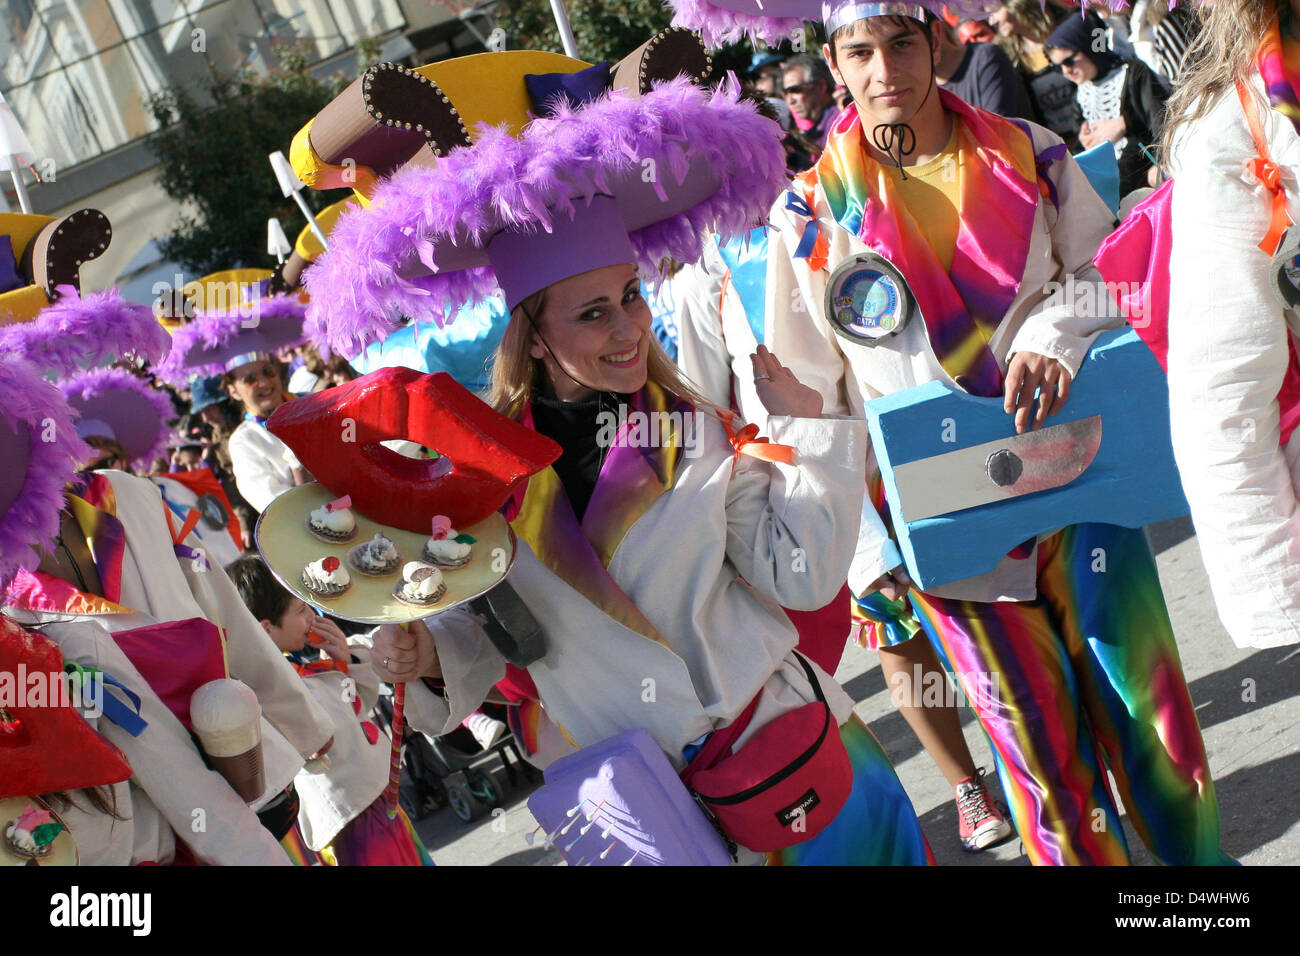 Patras, Greece. 17th March 2013. Revellers dance in colorful costumes at Carnival in  Patras, in Greece, 17 March 2013. The Patras Carnival is the biggest event of its kind in Greece and one of the biggest in Europe. Photo: Menelaos Michalatos/dpa/Alamy Live News Stock Photo